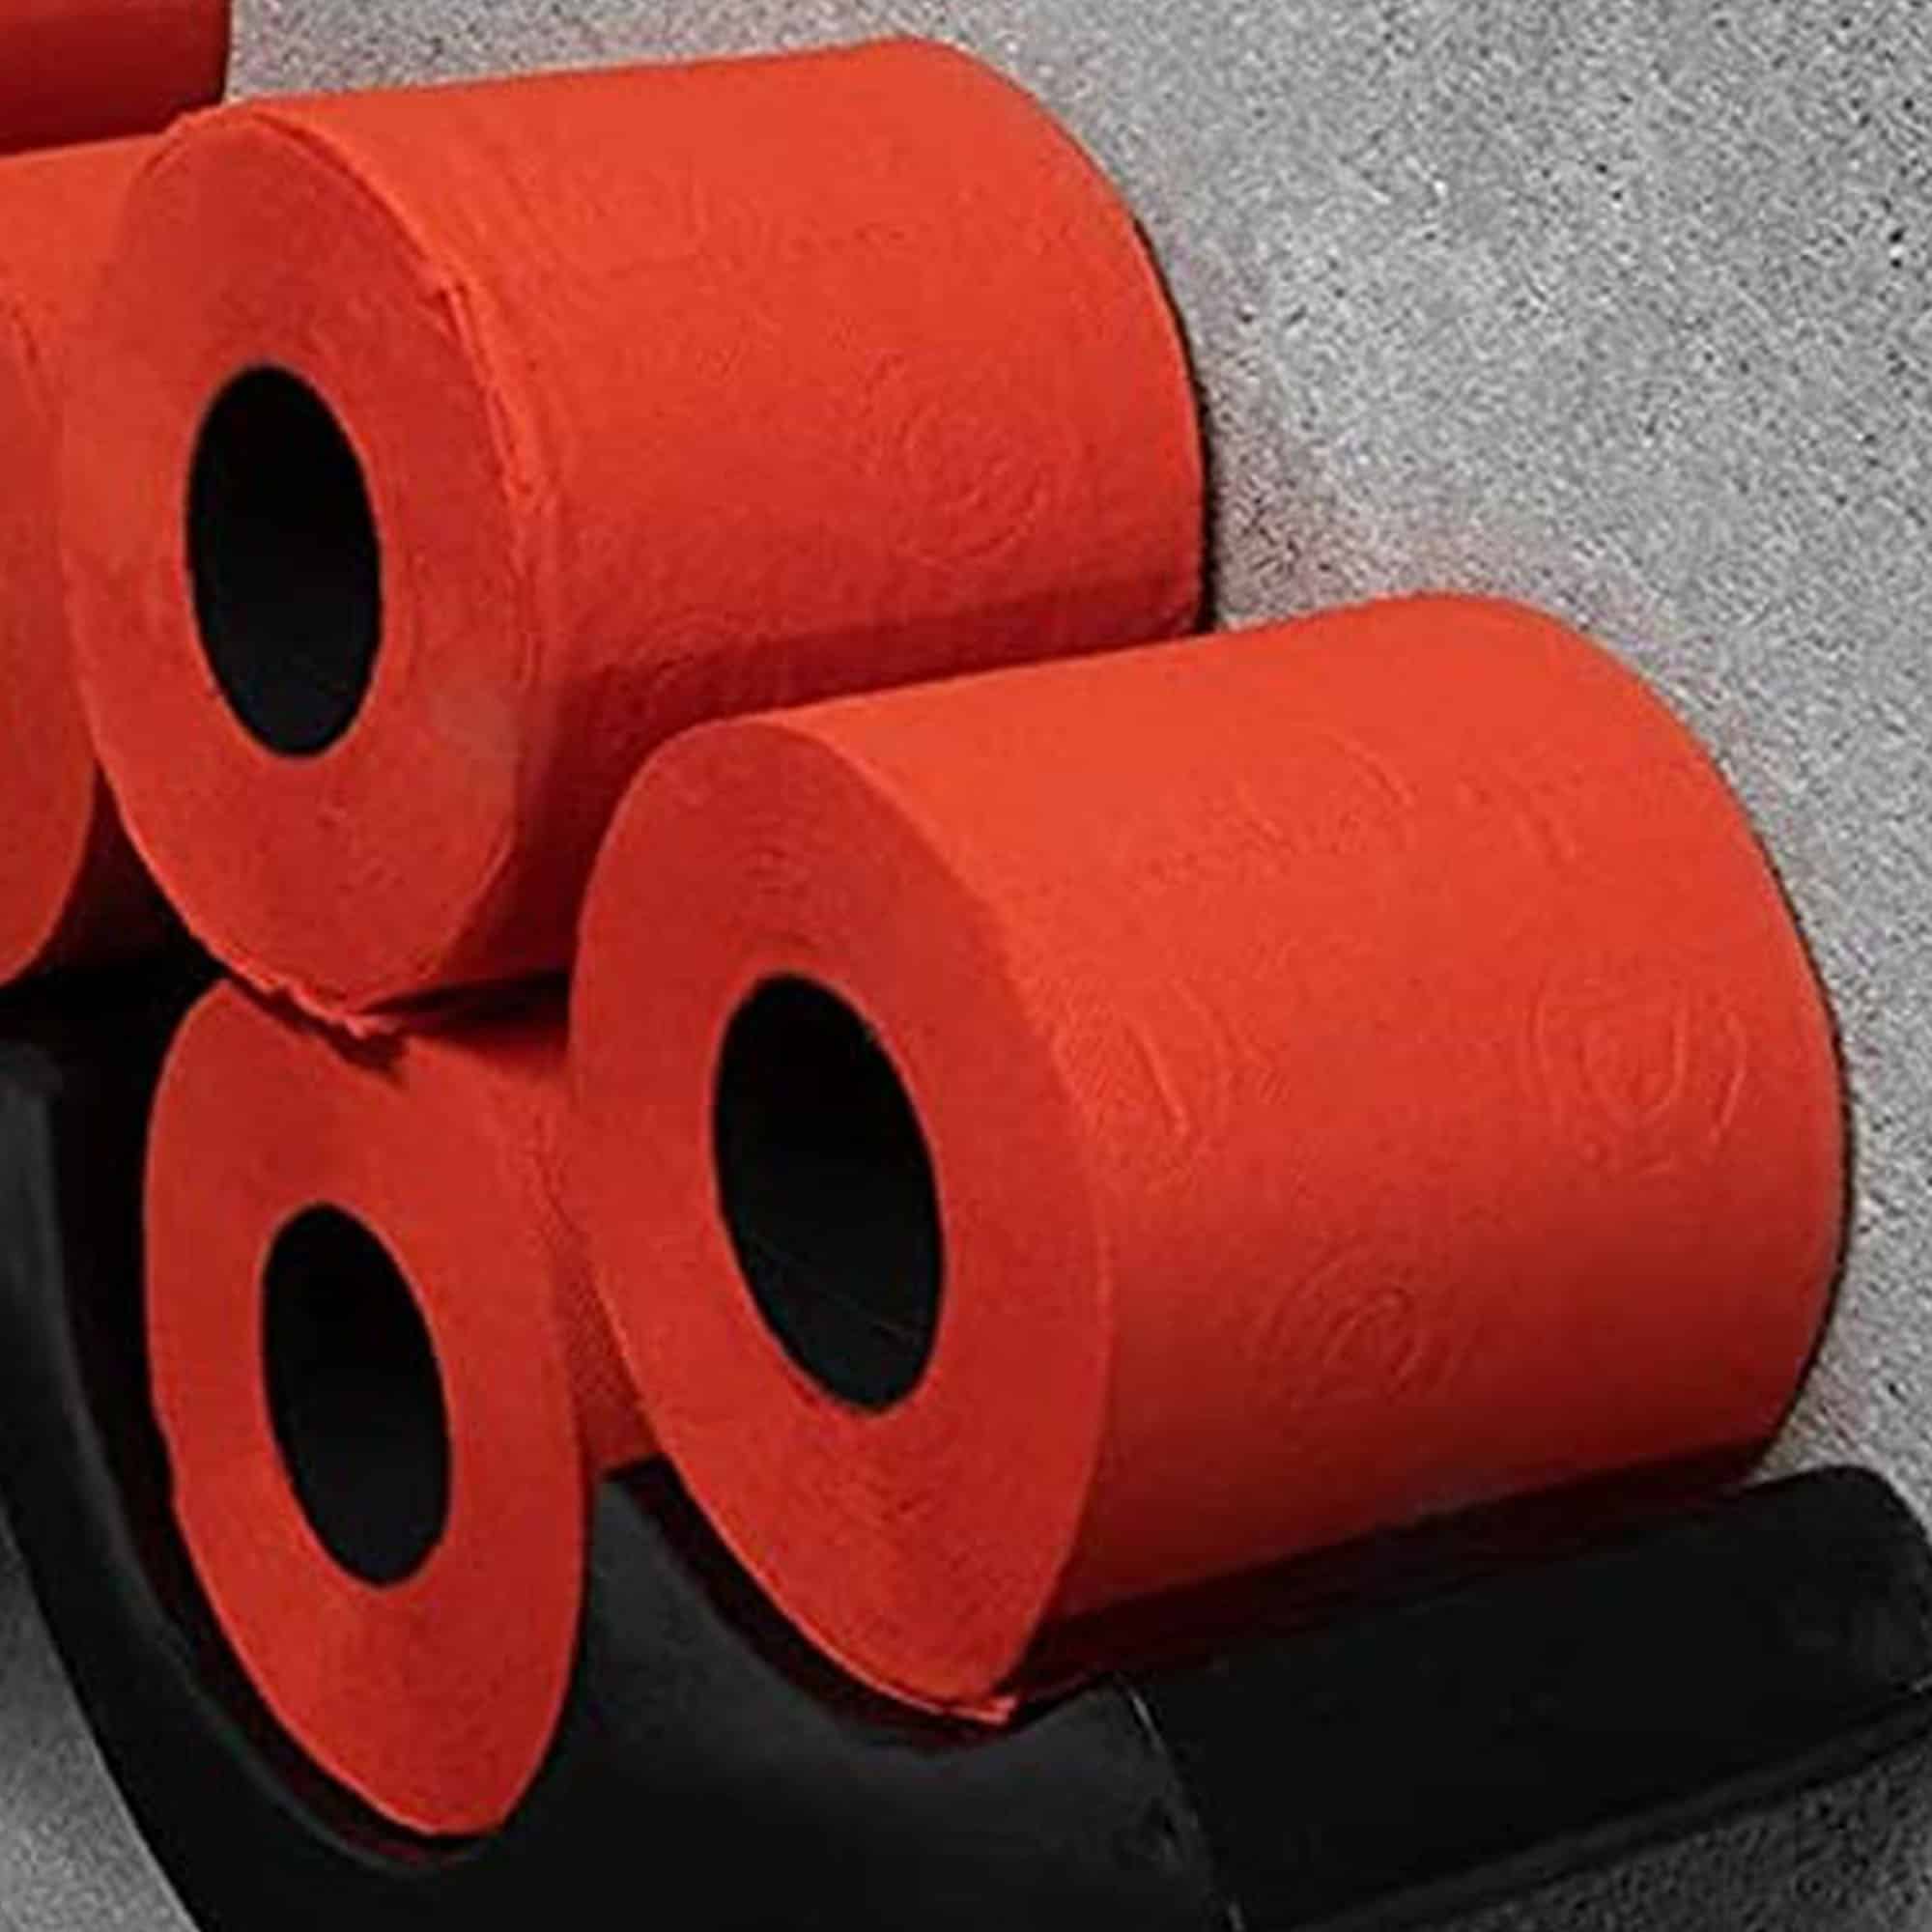 https://roll-lux.com/wp-content/uploads/2020/01/RC200064199-Red-Toilet-Paper-3-ply-Gift-box-2-Rolls-140-Premium-Quality-sheets-4.jpg